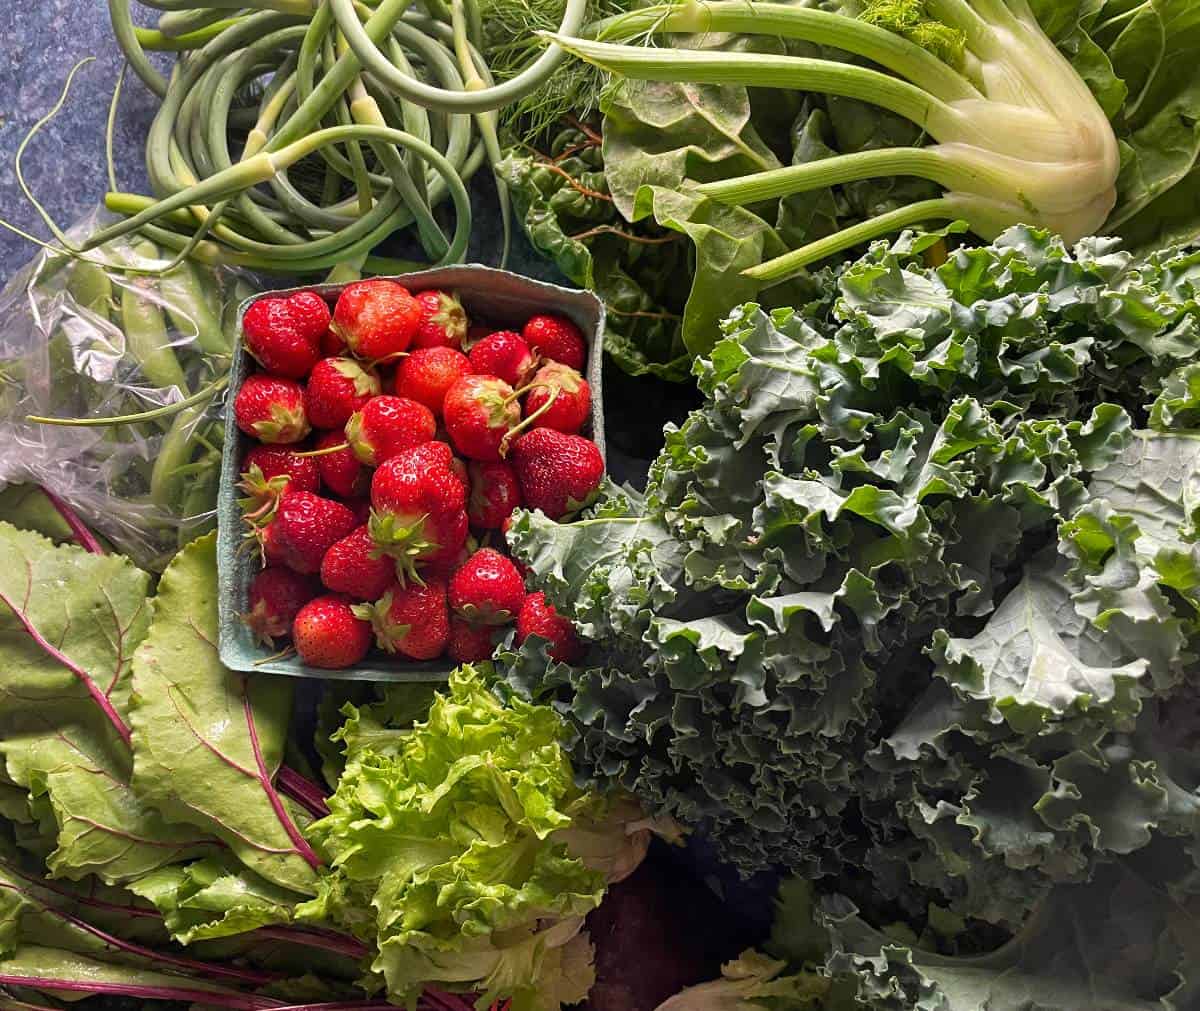 Fresh local produce laid out on a counter, including strawberries, rainbow chard, sugar snap peas, kale, garlic scapes and fennel.